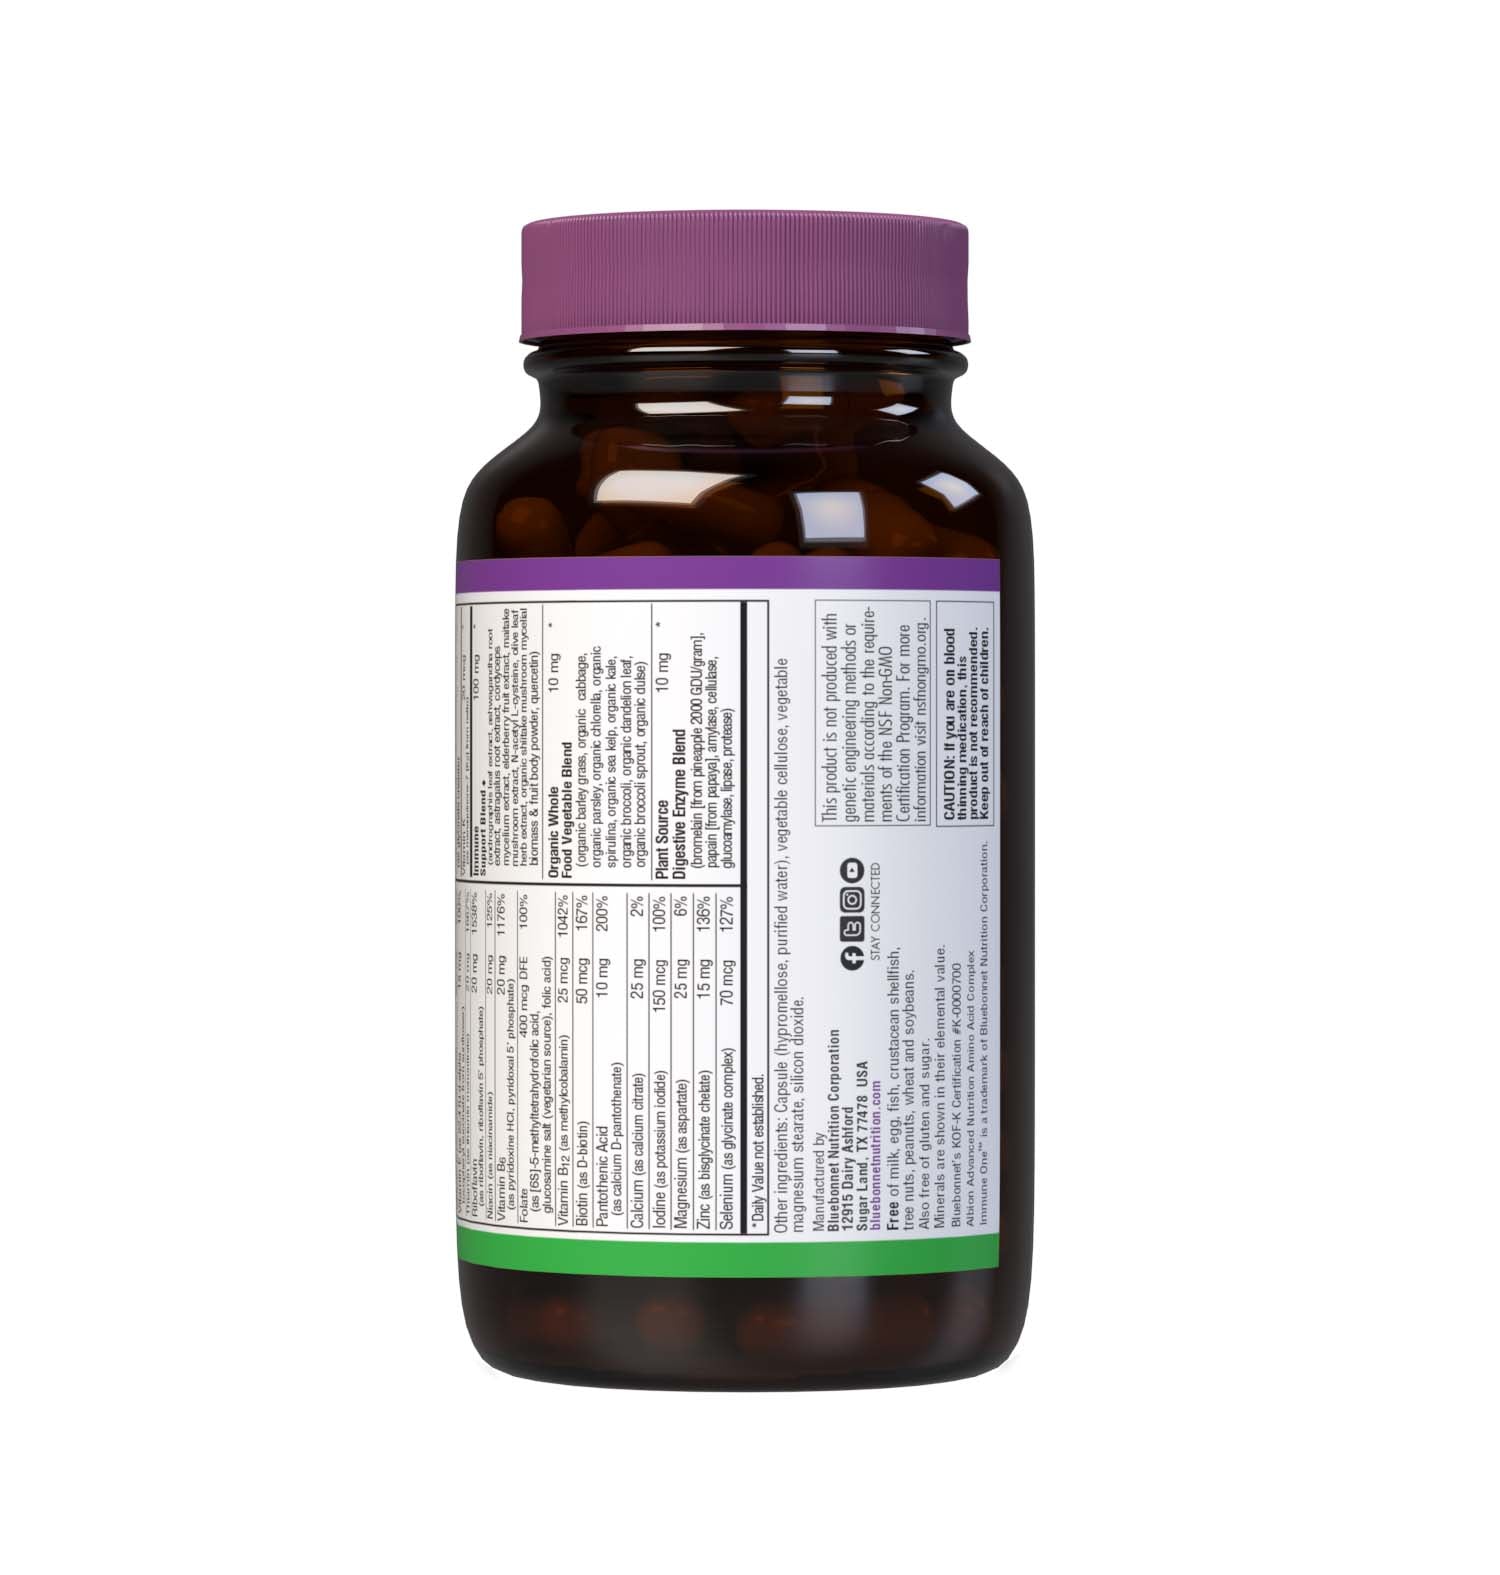 Bluebonnet Nutrition's Immune One 90 vegetable capsules delivers targeted nutrients for respiratory support, sinus comfort, immune defense and antioxidant protection including: Vitamin E derived from Non-GMO sunflower oil Active coenzyme forms of B vitamins. Description panel. #size_90 count